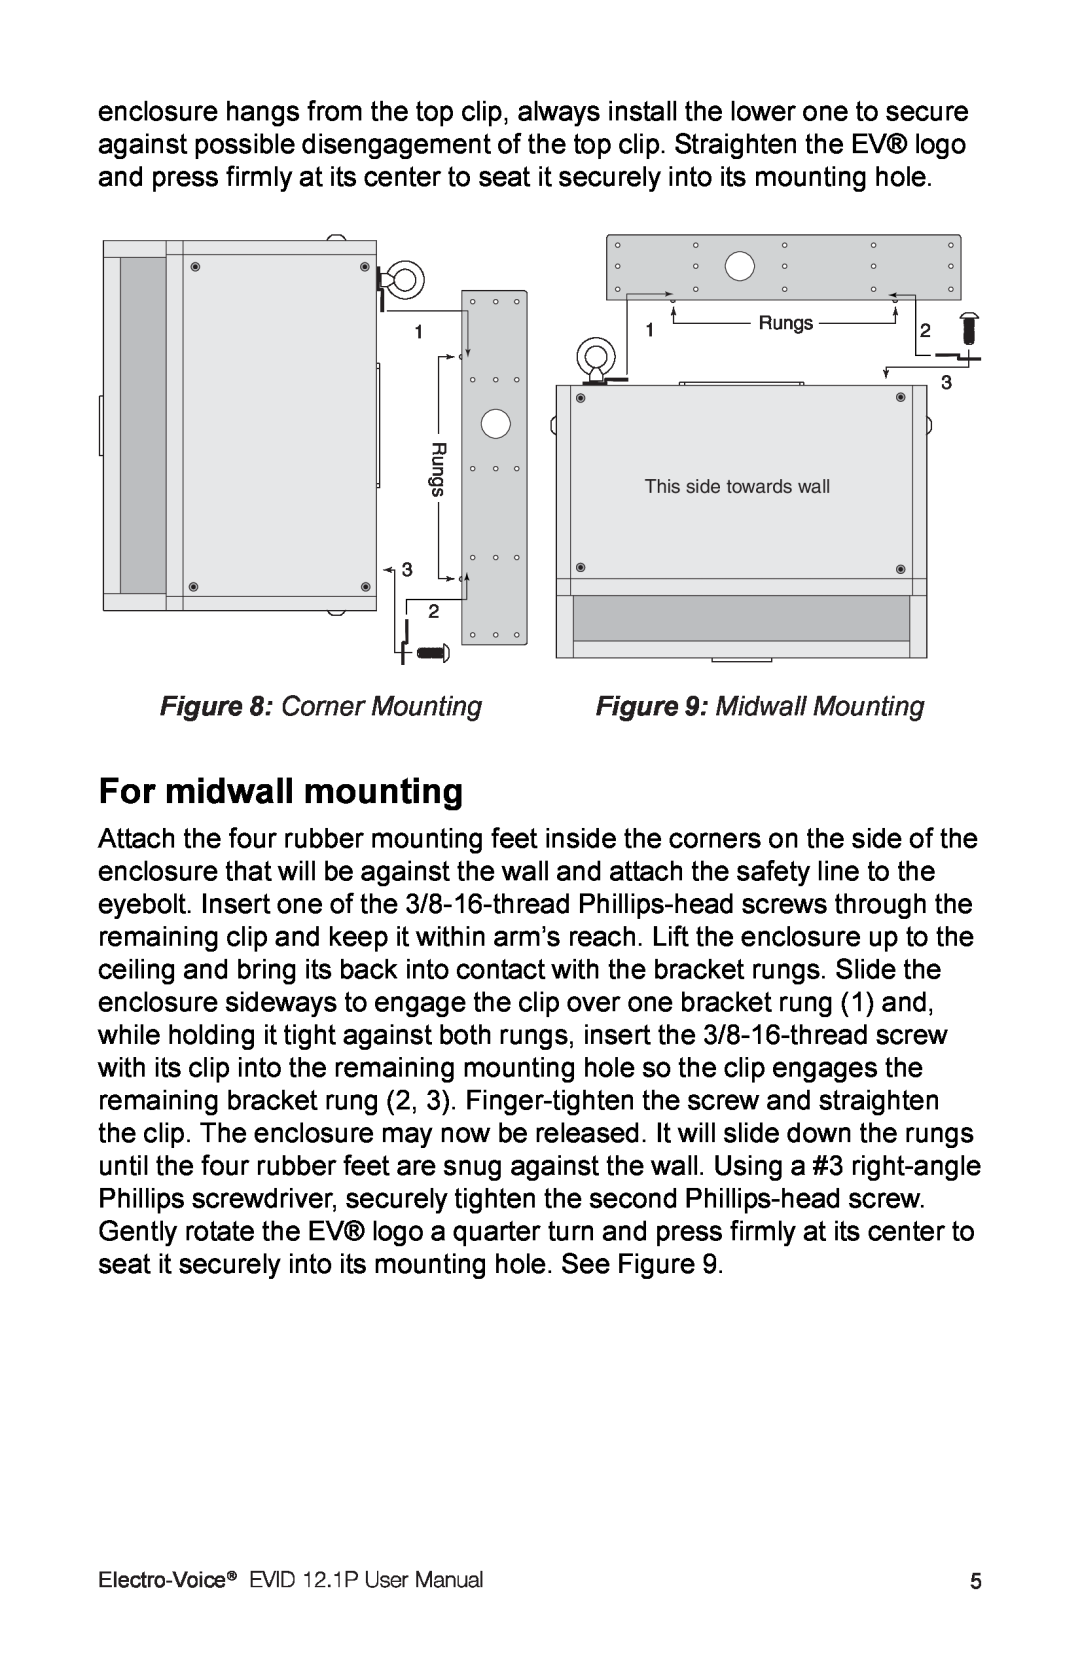 Electro-Voice 2.1P user manual For midwall mounting, Corner Mounting, Midwall Mounting, Electro-Voice 